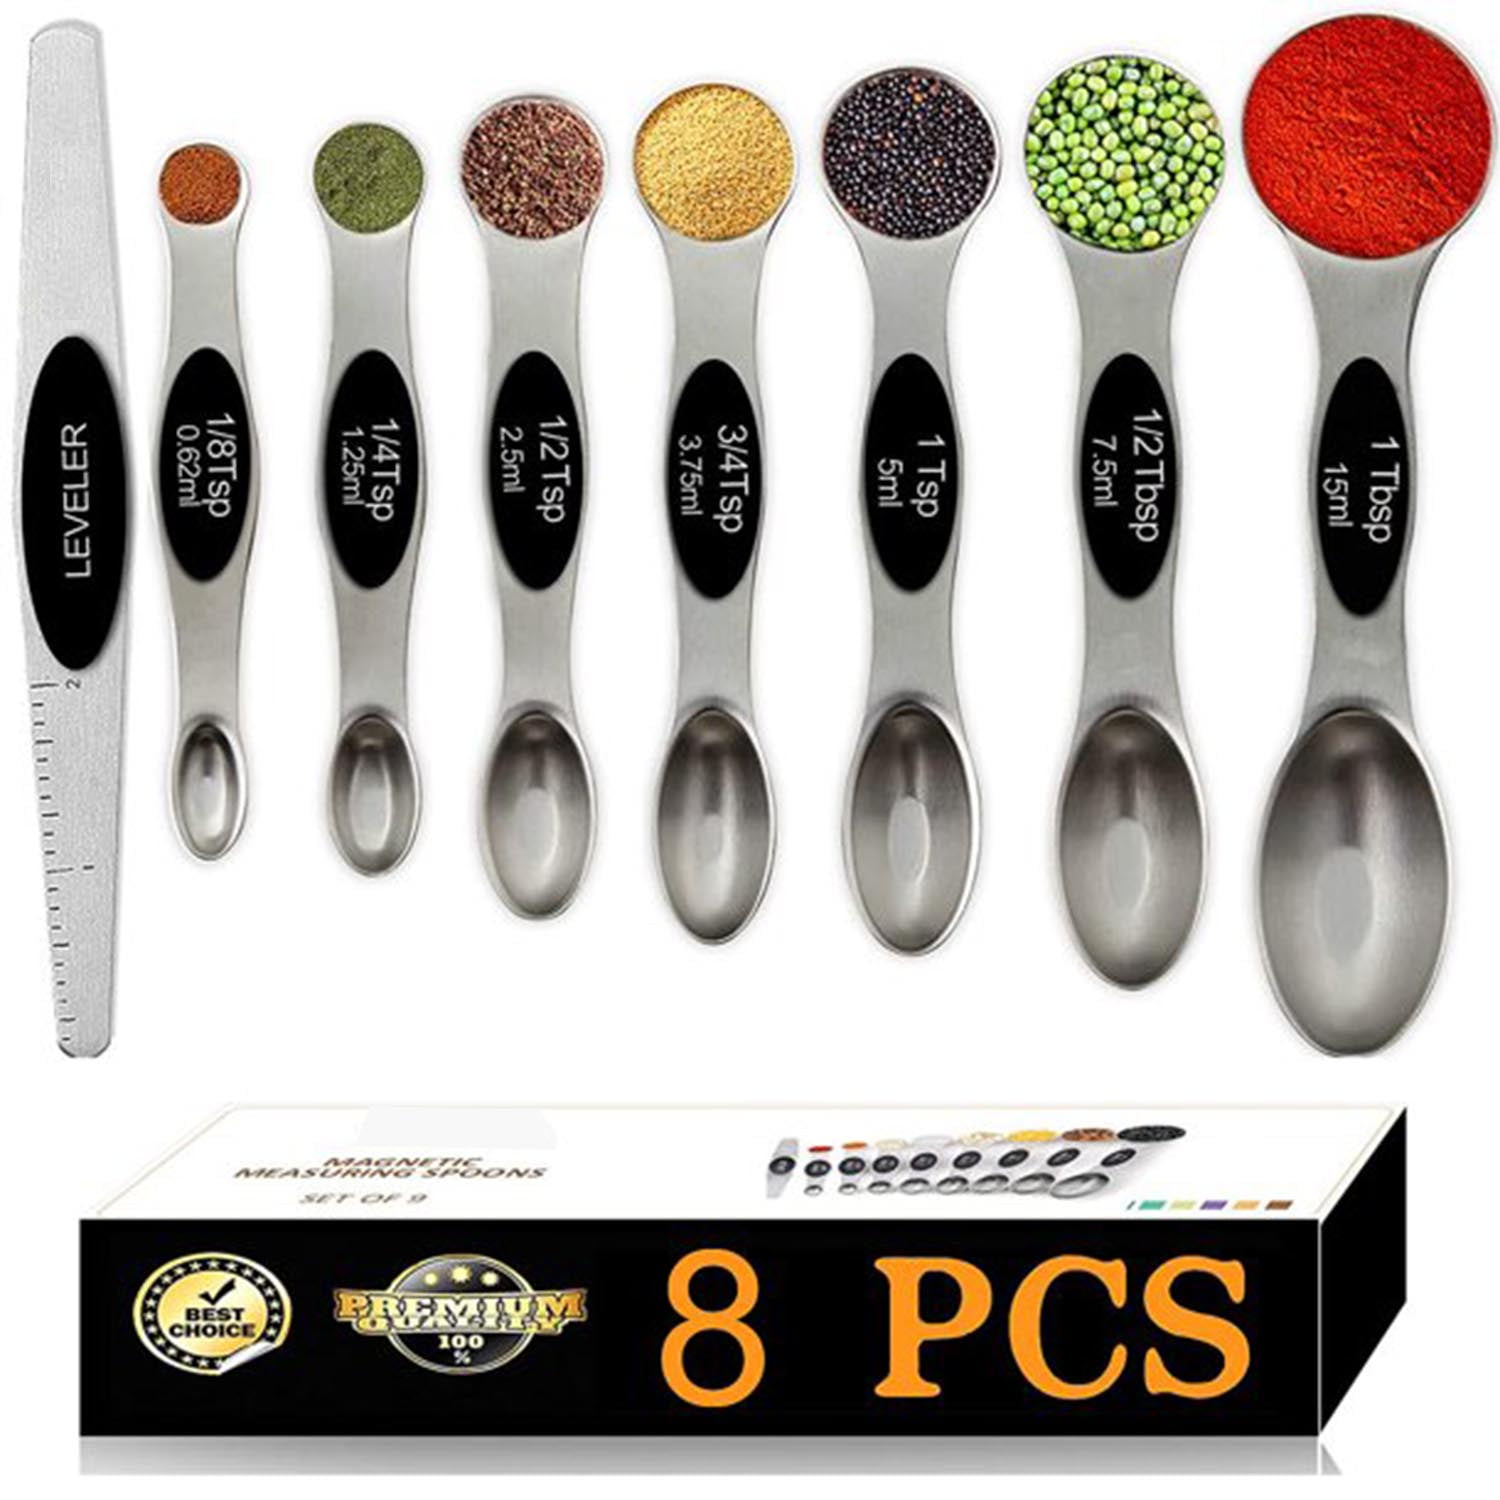 Magnetic Measuring Spoons Set of 9 Stainless Steel Stackable Measuring  Spoons Heavy Duty Nesting Teaspoons Tablespoons for Measuring Dry and  Liquid